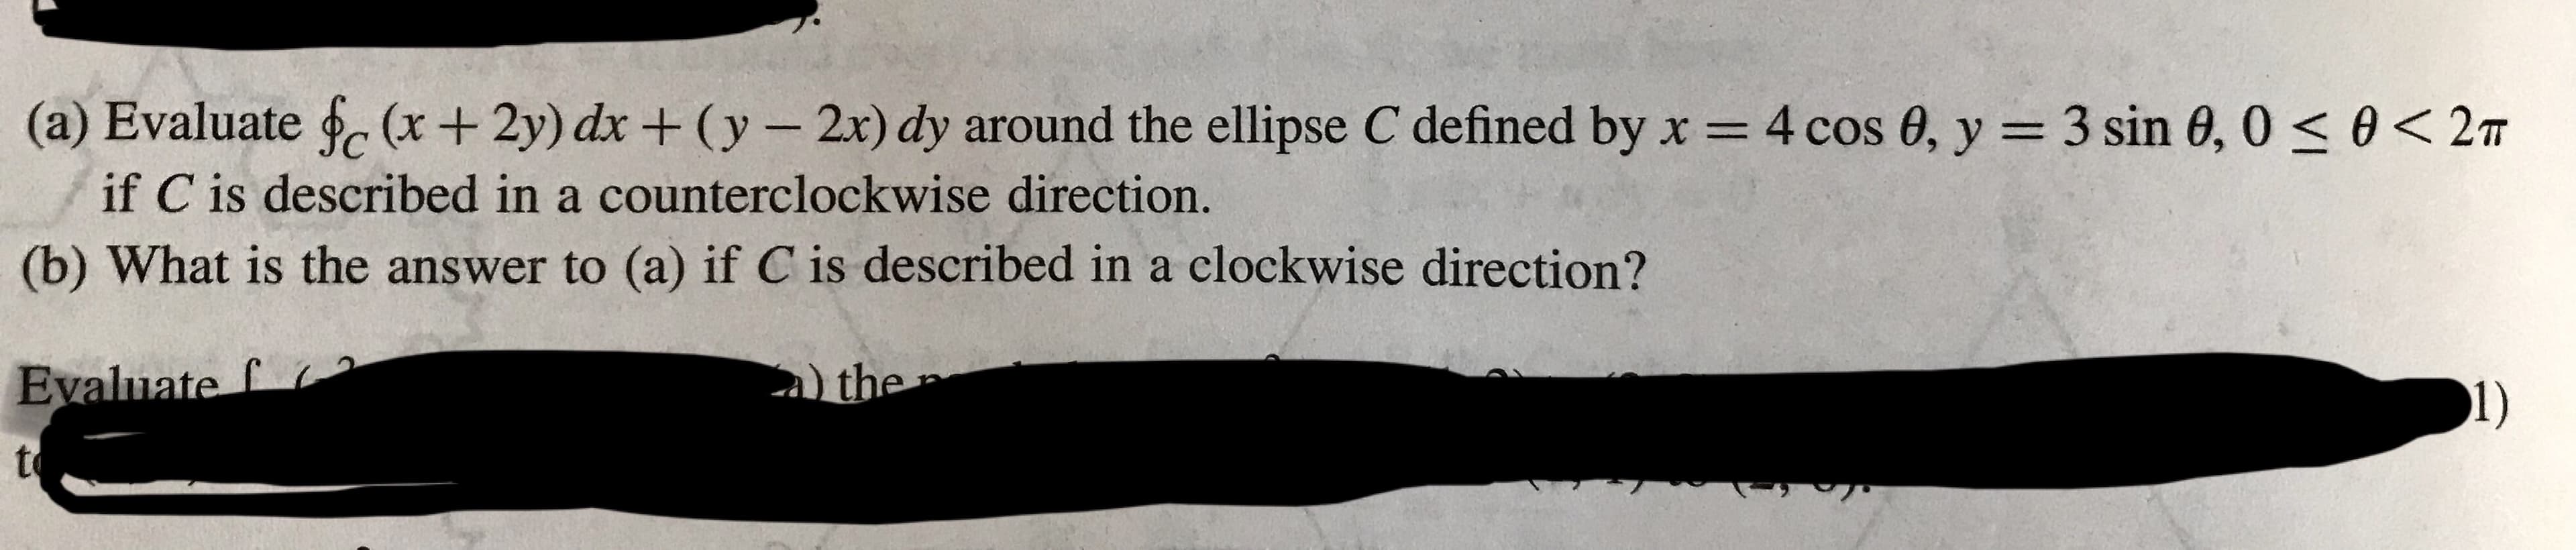 (a) Evaluate fc (x + 2y) dx + (y-20 dy around the ellipse C defined by x = 4 cos θ, y = 3 sin θ, 0 < θ < 2π
if C is described in a counterclockwise direction.
(b) What is the answer to (a) if C is described in a clockwise direction?
Evaluate
